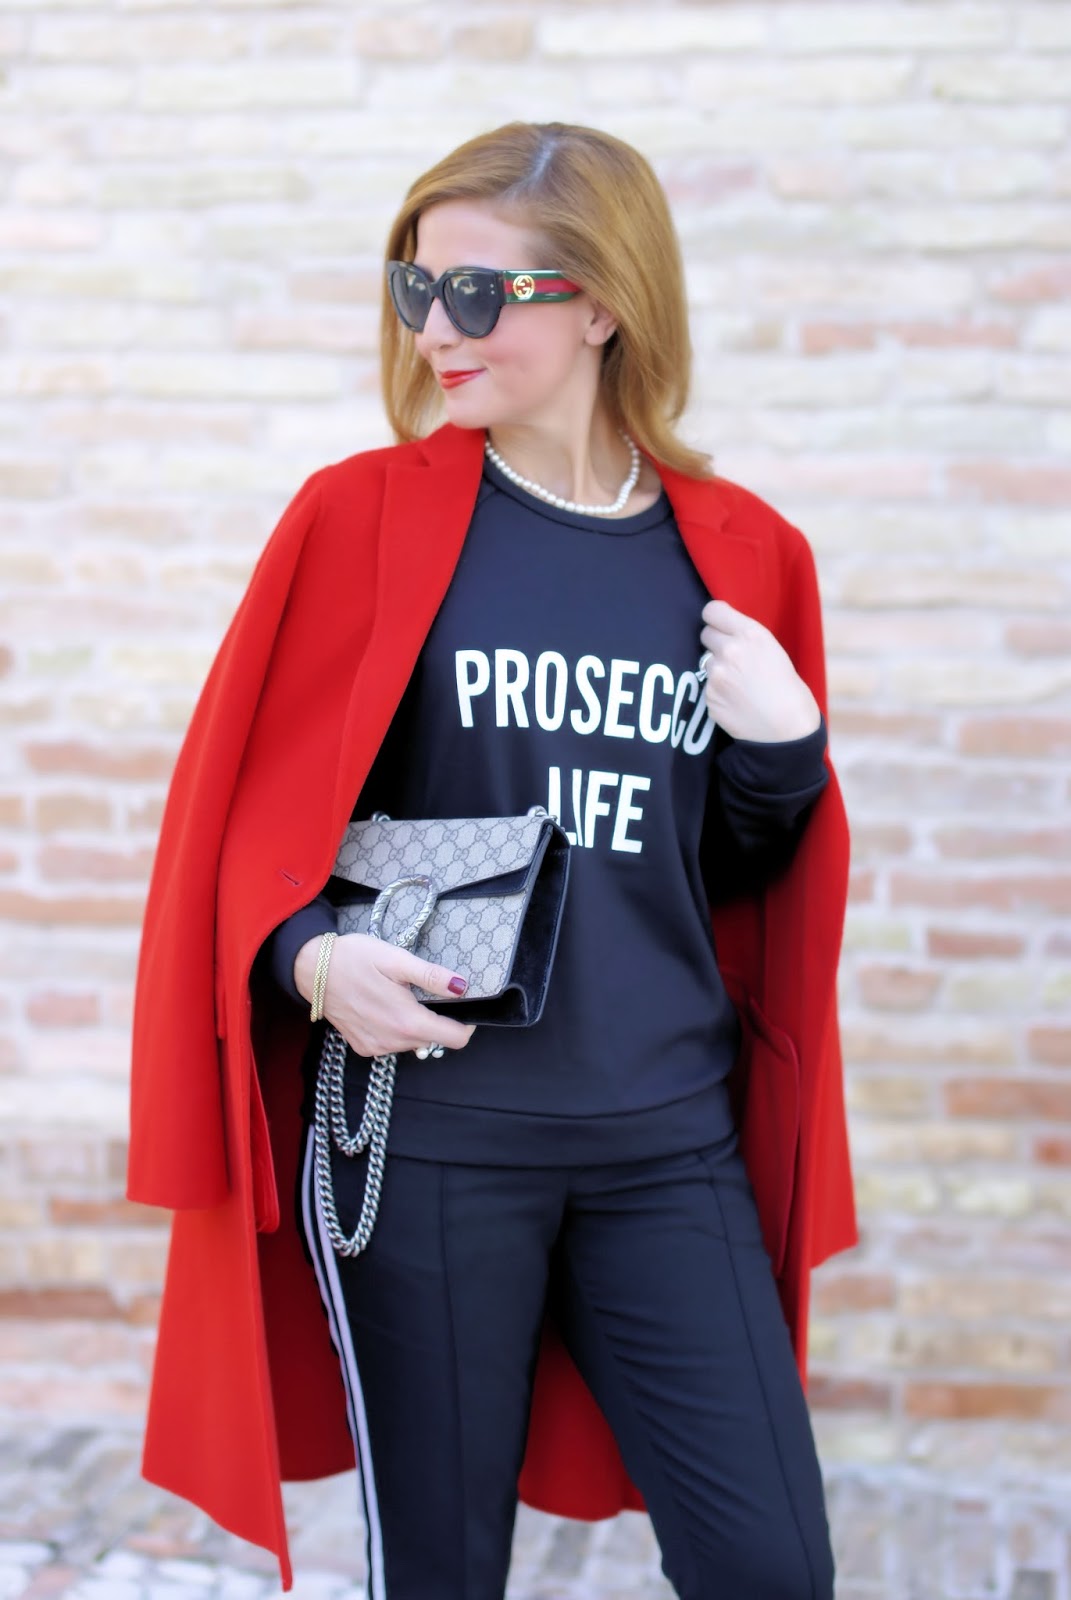 How to wear a read coat with 1.2.3 Paris and prosecco life sweatshirt on Fashion and Cookies fashion blog